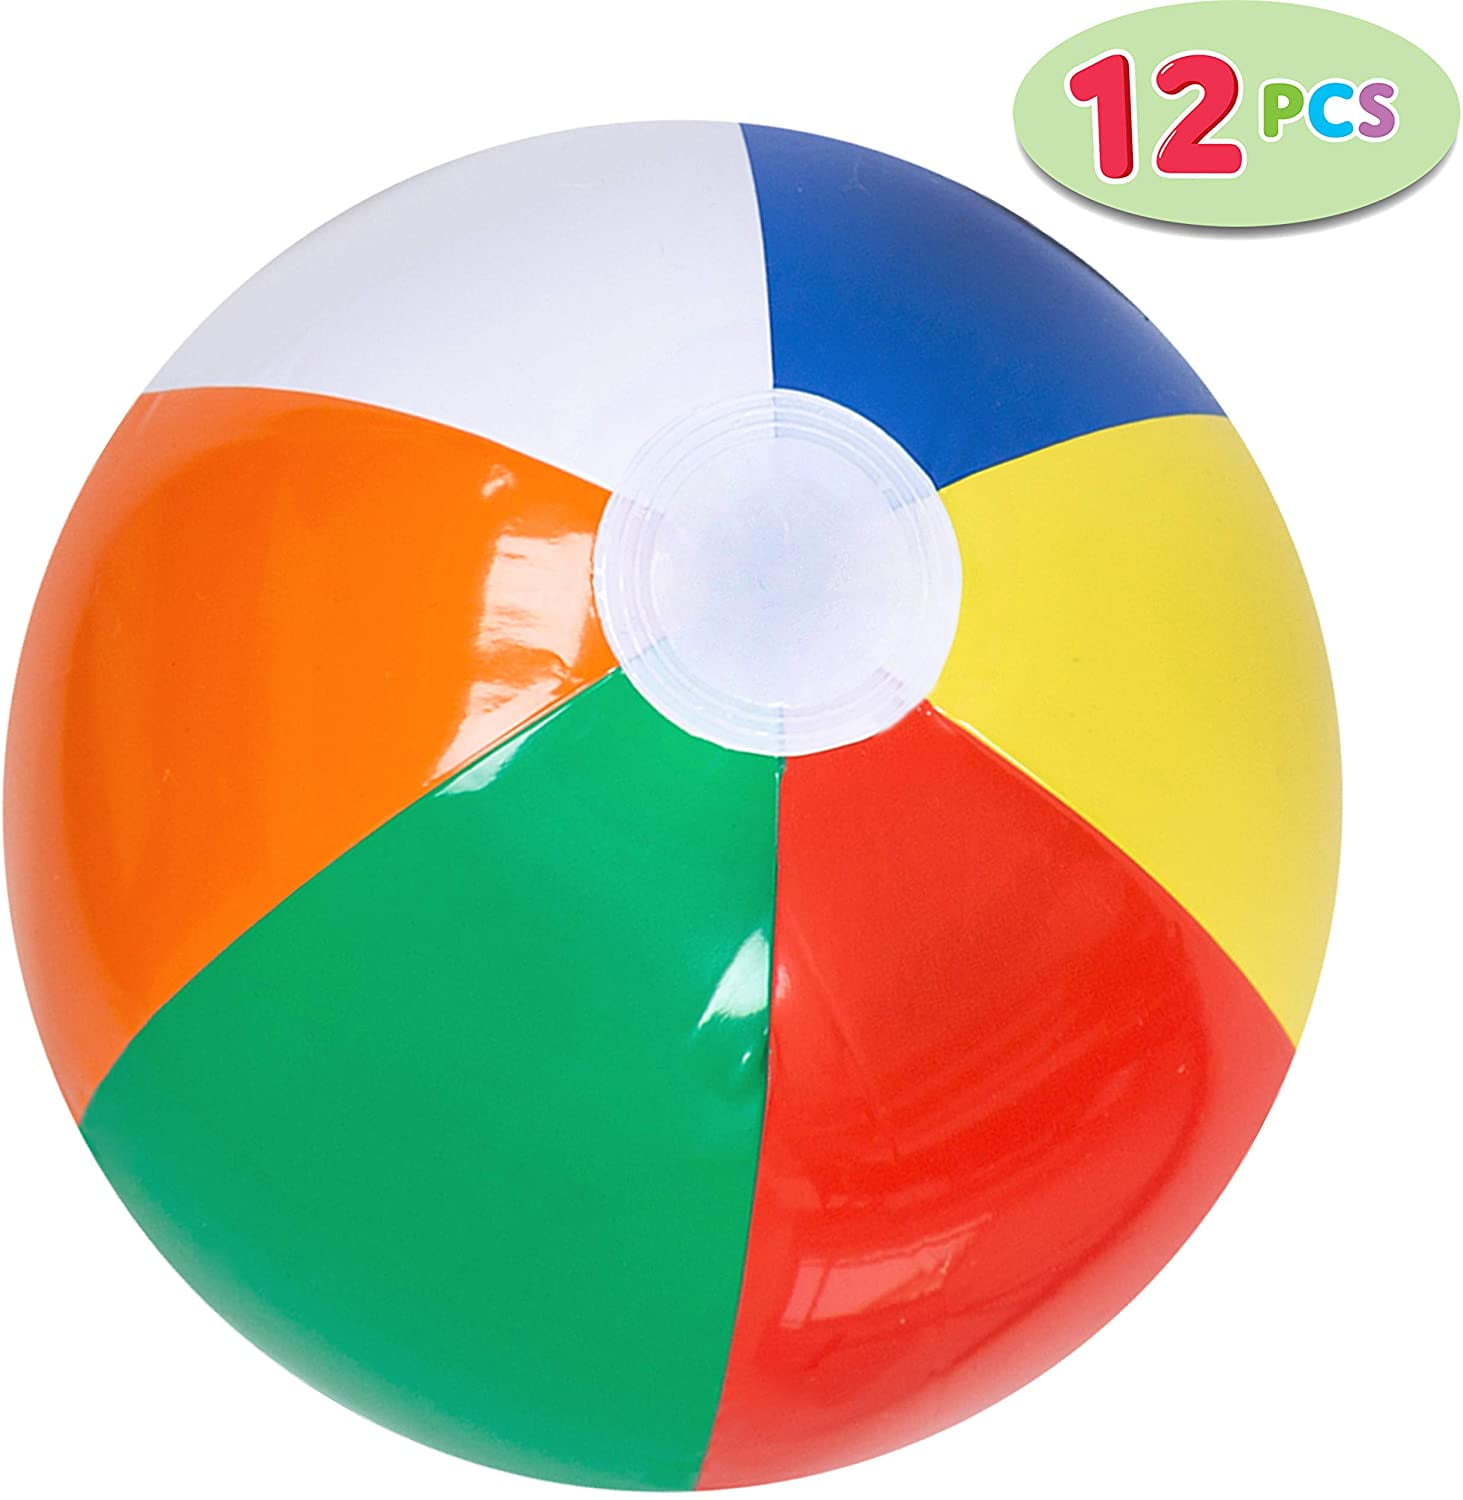 12inch Inflatable Pool Party Toy Sandy Beach Ball Play Ball Kids Bathing Toy 